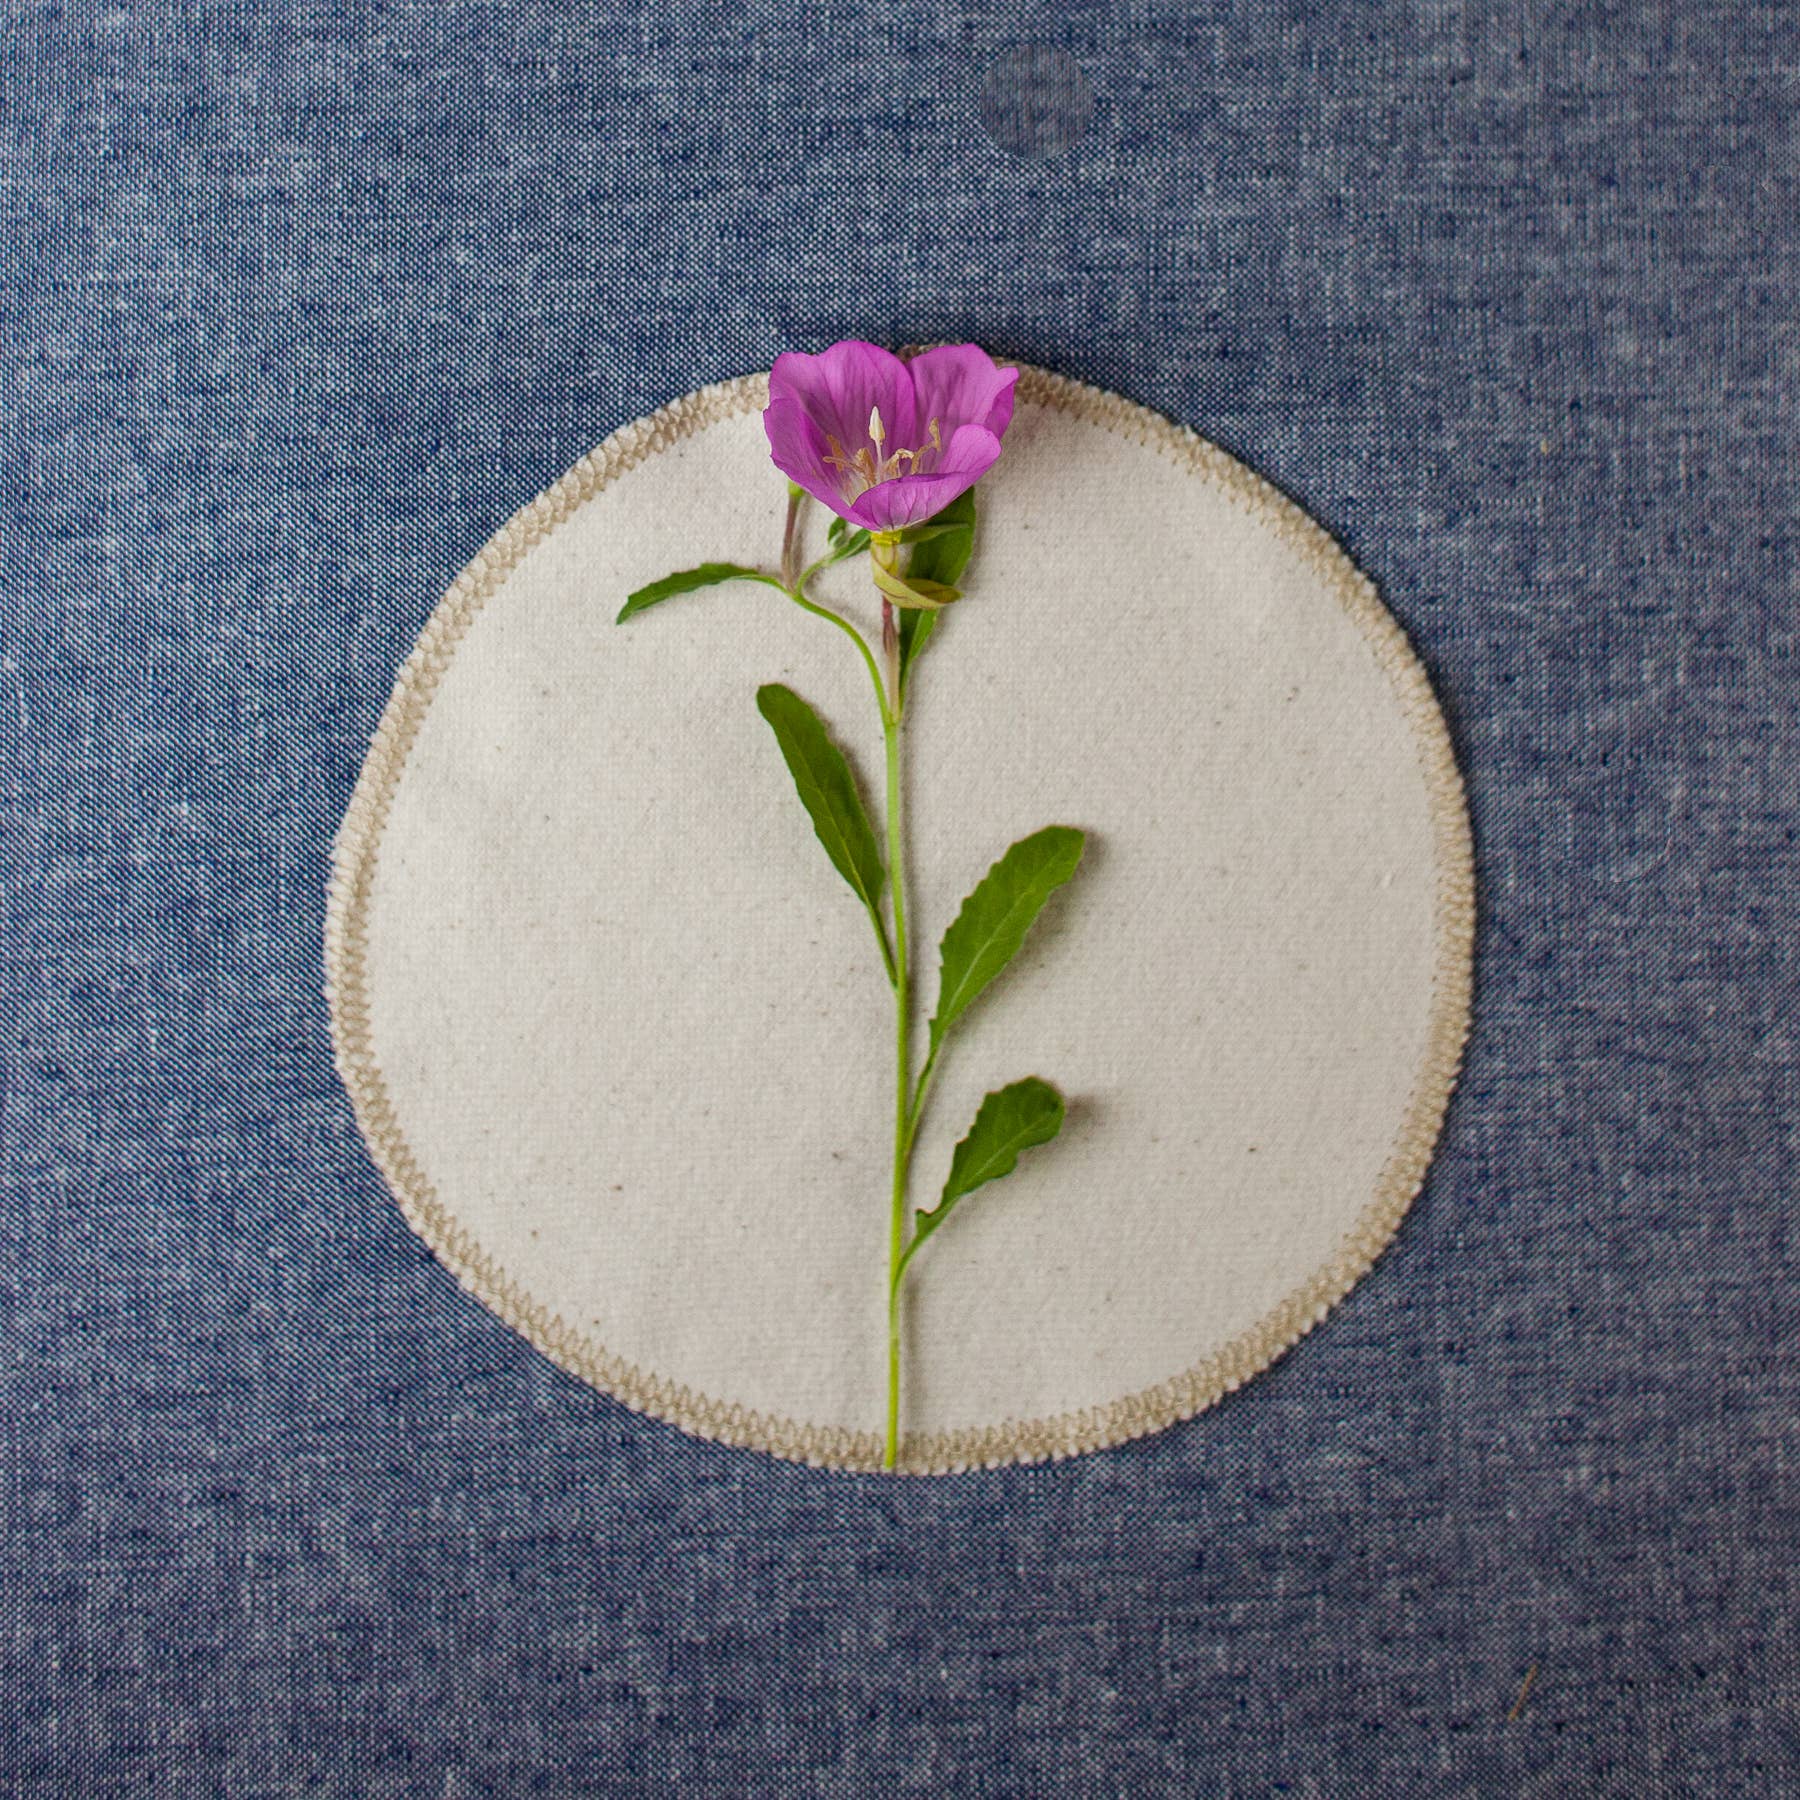 Single round face cloth with a wildflower on top on a blue cloth background